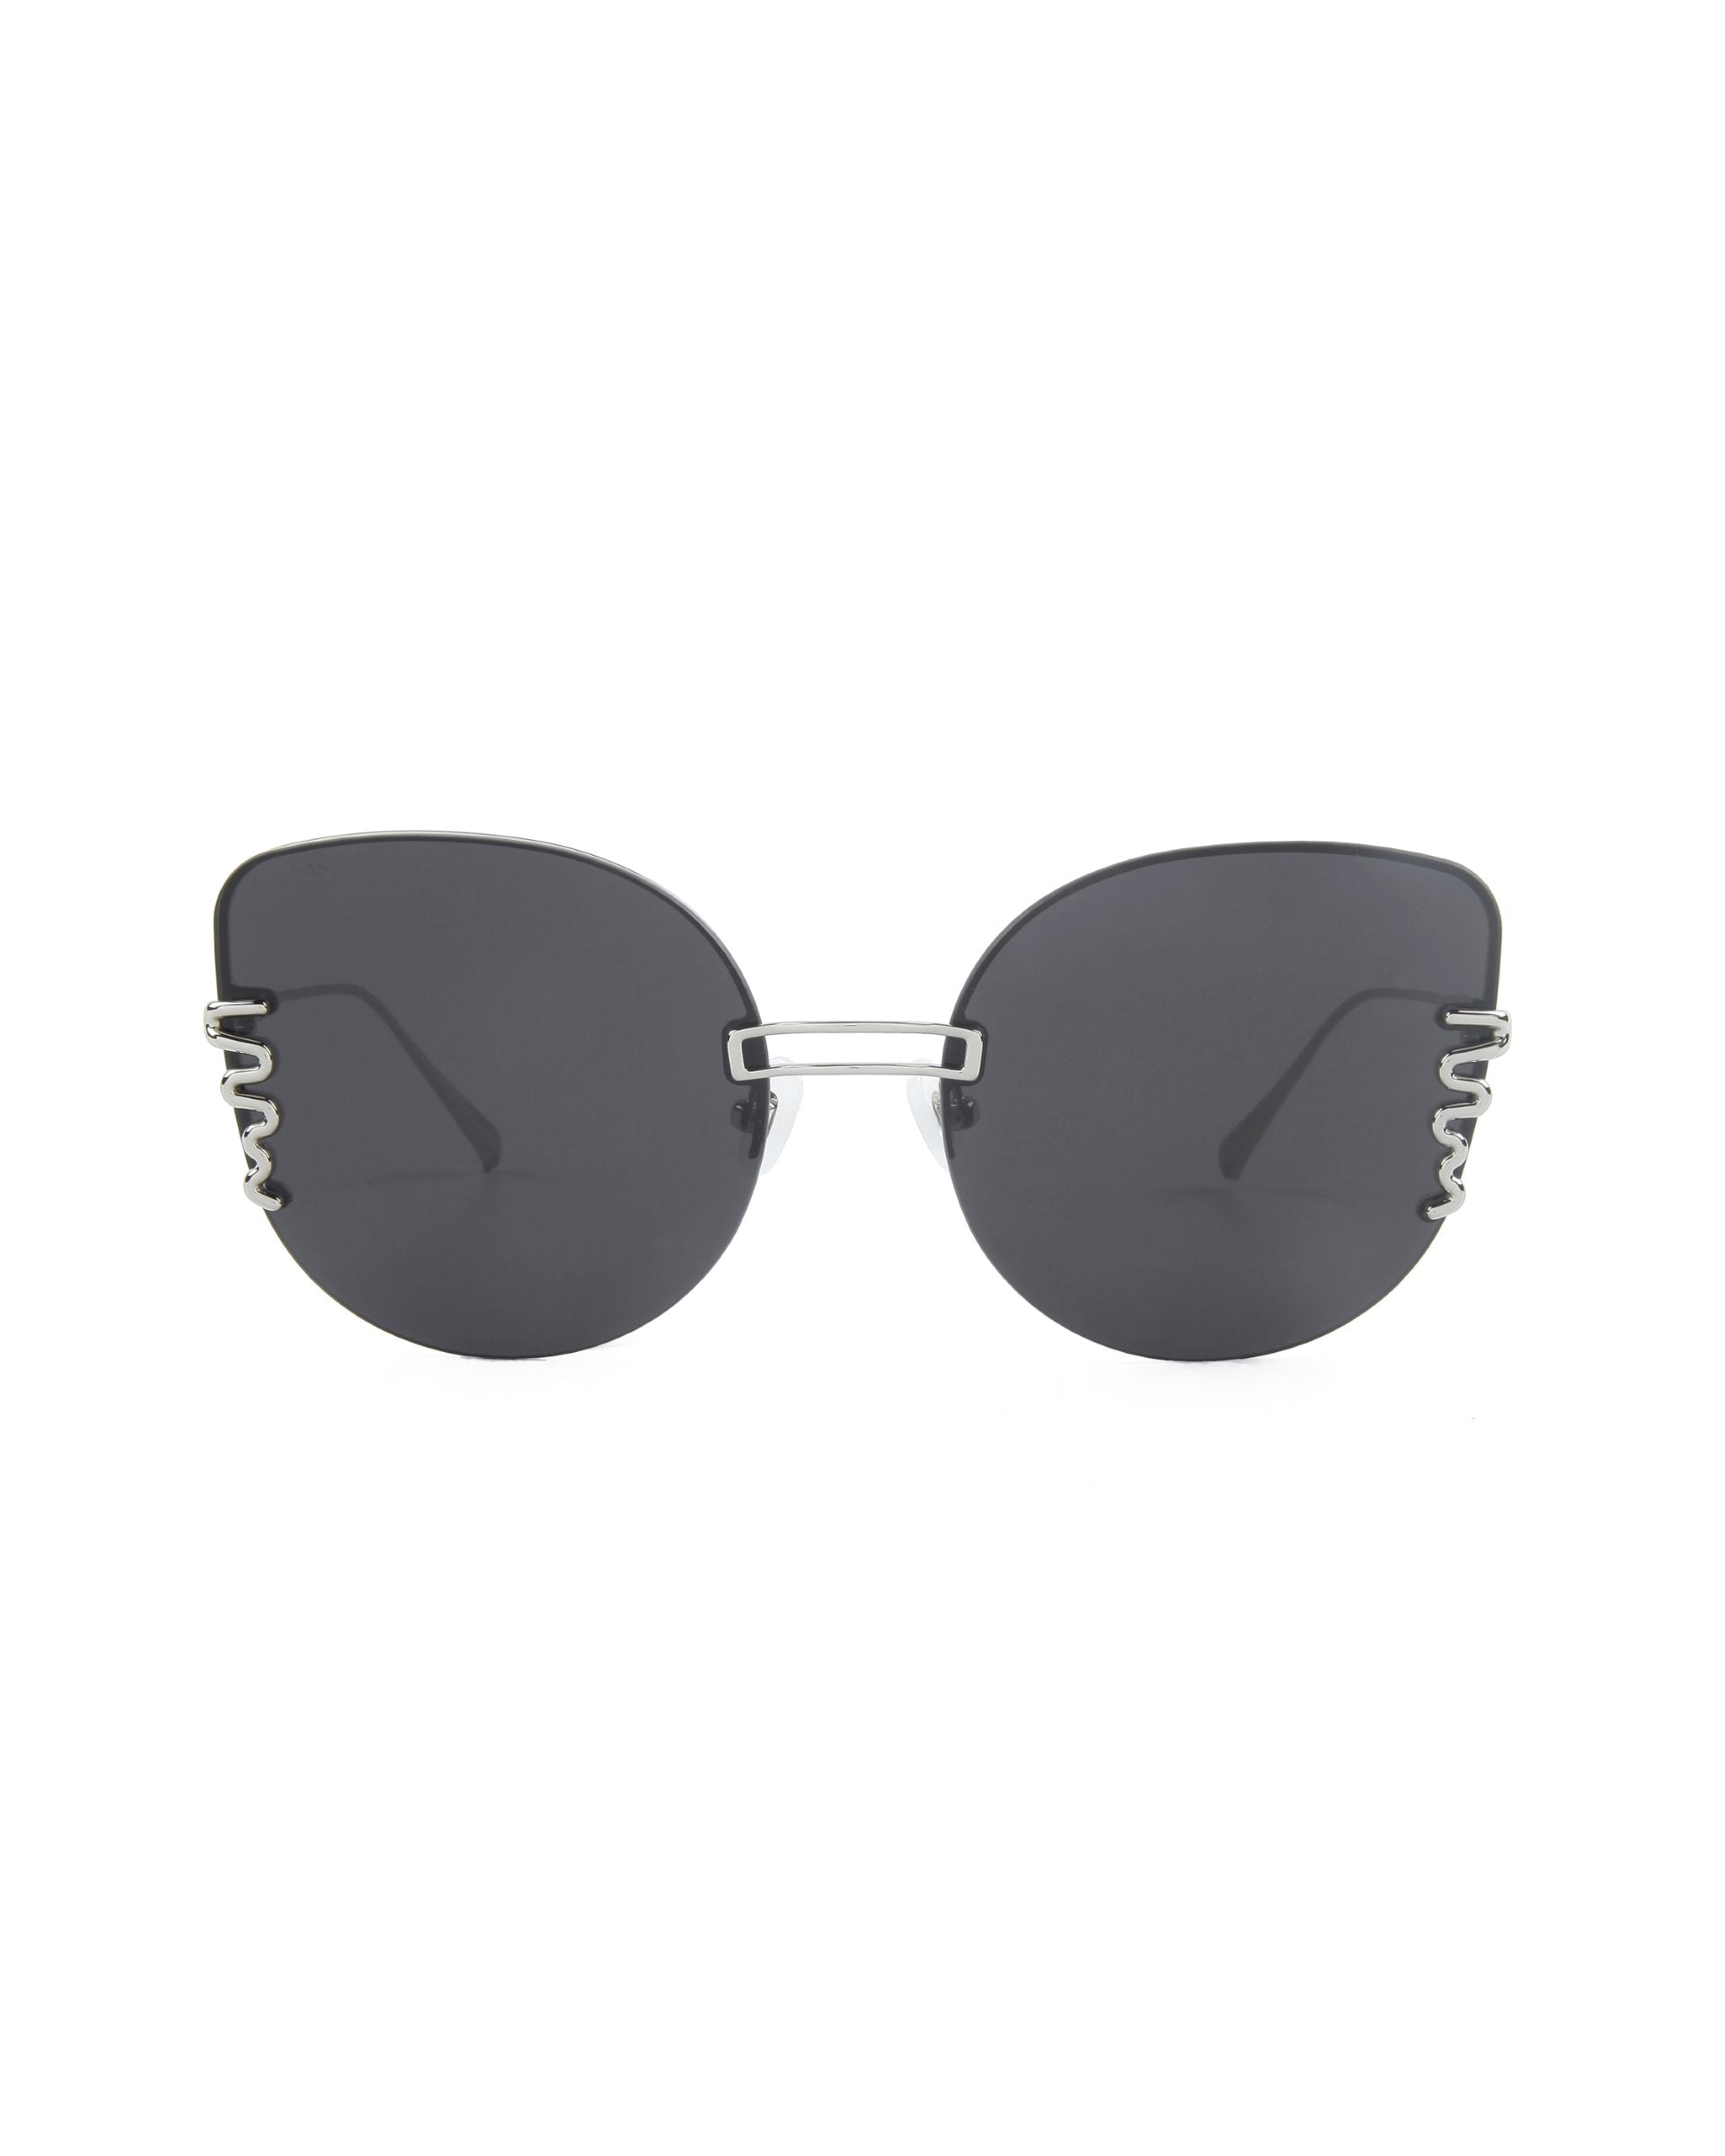 A pair of stylish, oversized cat-eye sunglasses with dark lenses and a unique frame design. The frames feature a silver metal bridge and decorative silver elements on the outer edges of the lenses, adding a touch of elegance to the overall minimalist look. Plus, they offer 100% UV protection. These are the Girlboss by For Art&#39;s Sake®.